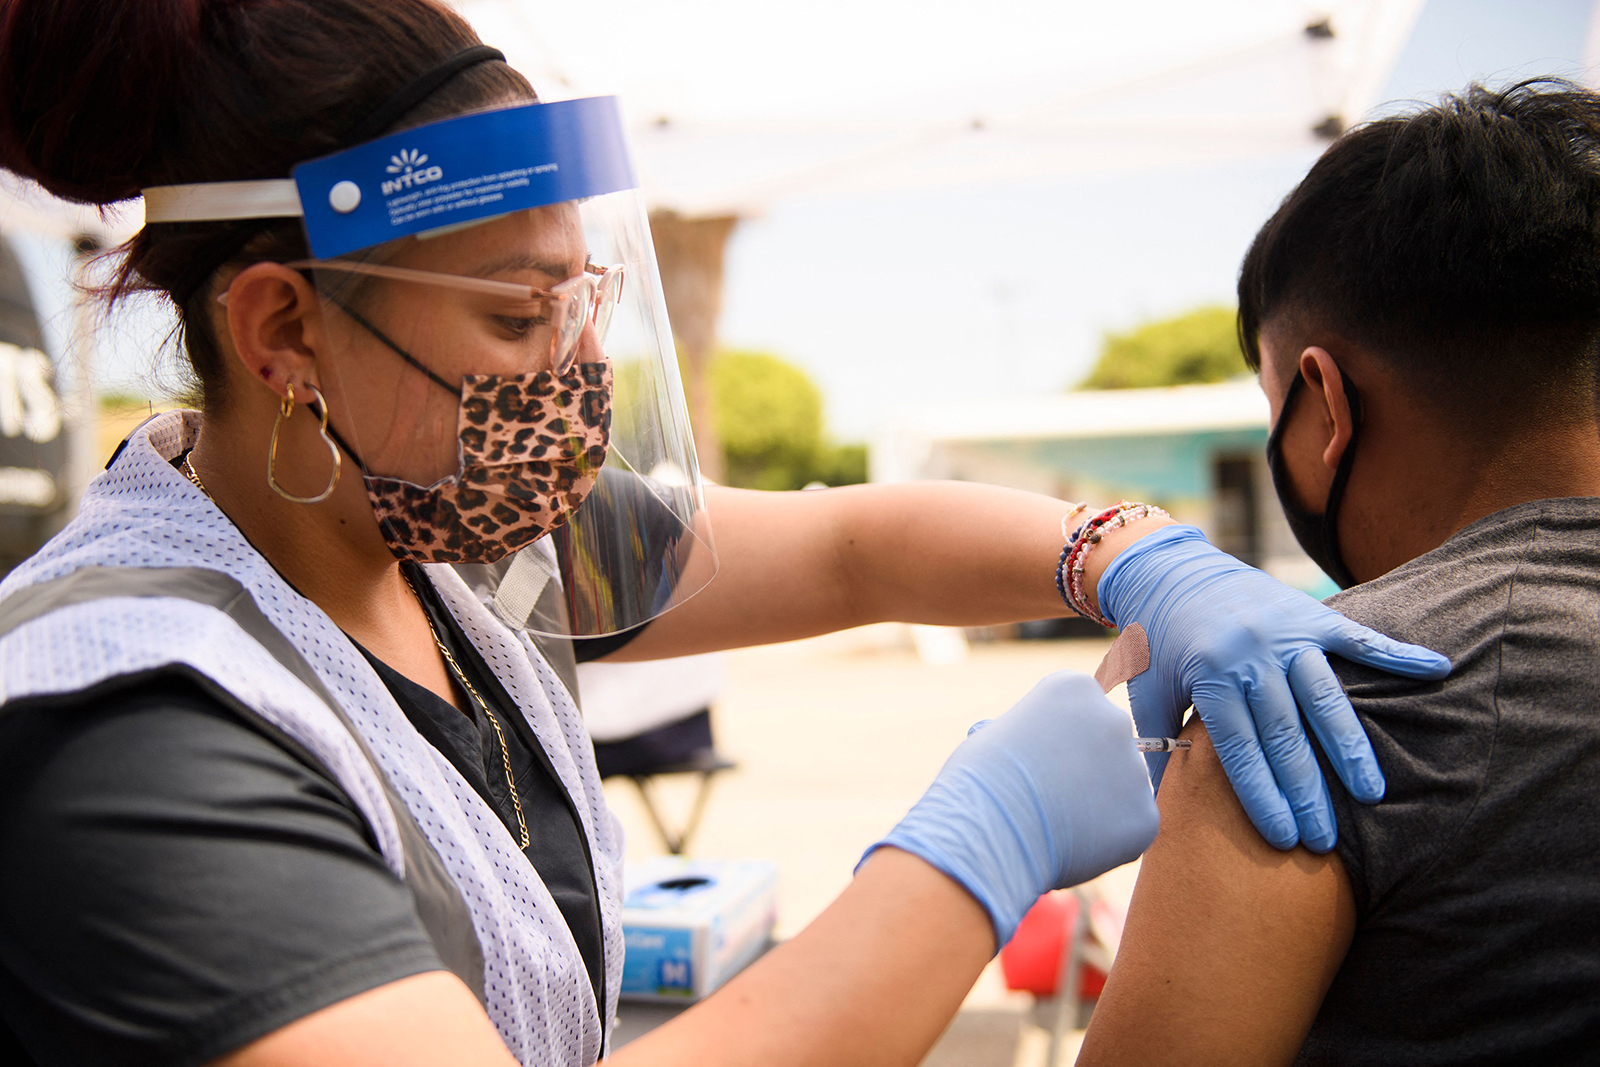 A 17-year-old receives a first dose of the Pfizer Covid-19 vaccine at a mobile vaccination clinic during a back to school event offering school supplies, Covid-19 vaccinations, face masks, and other resources for children and their families at the Weingart East Los Angeles YMCA.